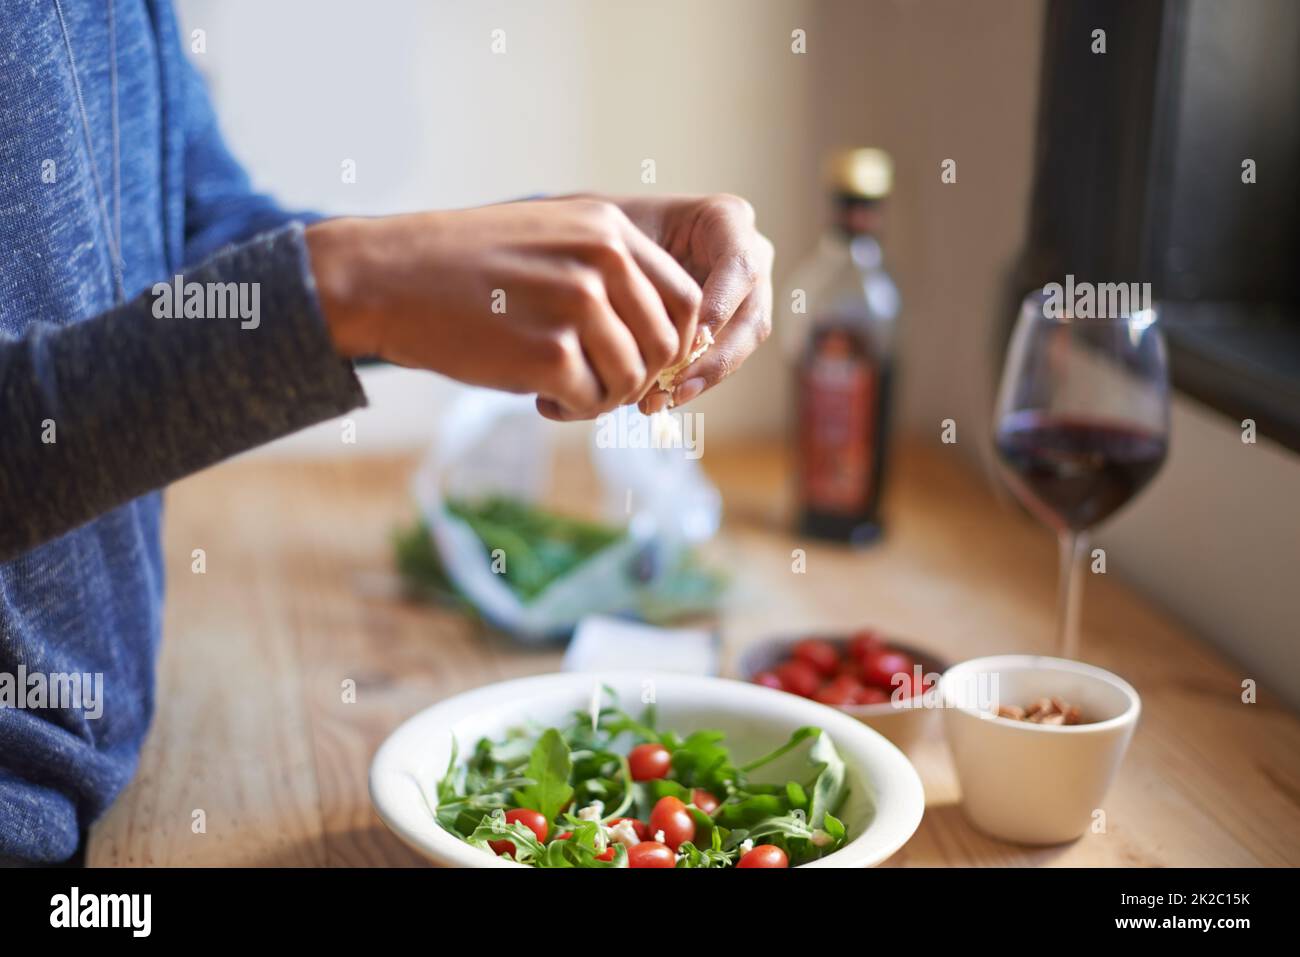 Creating the perfect lunch. A young woman making a salad in her kitchen. Stock Photo